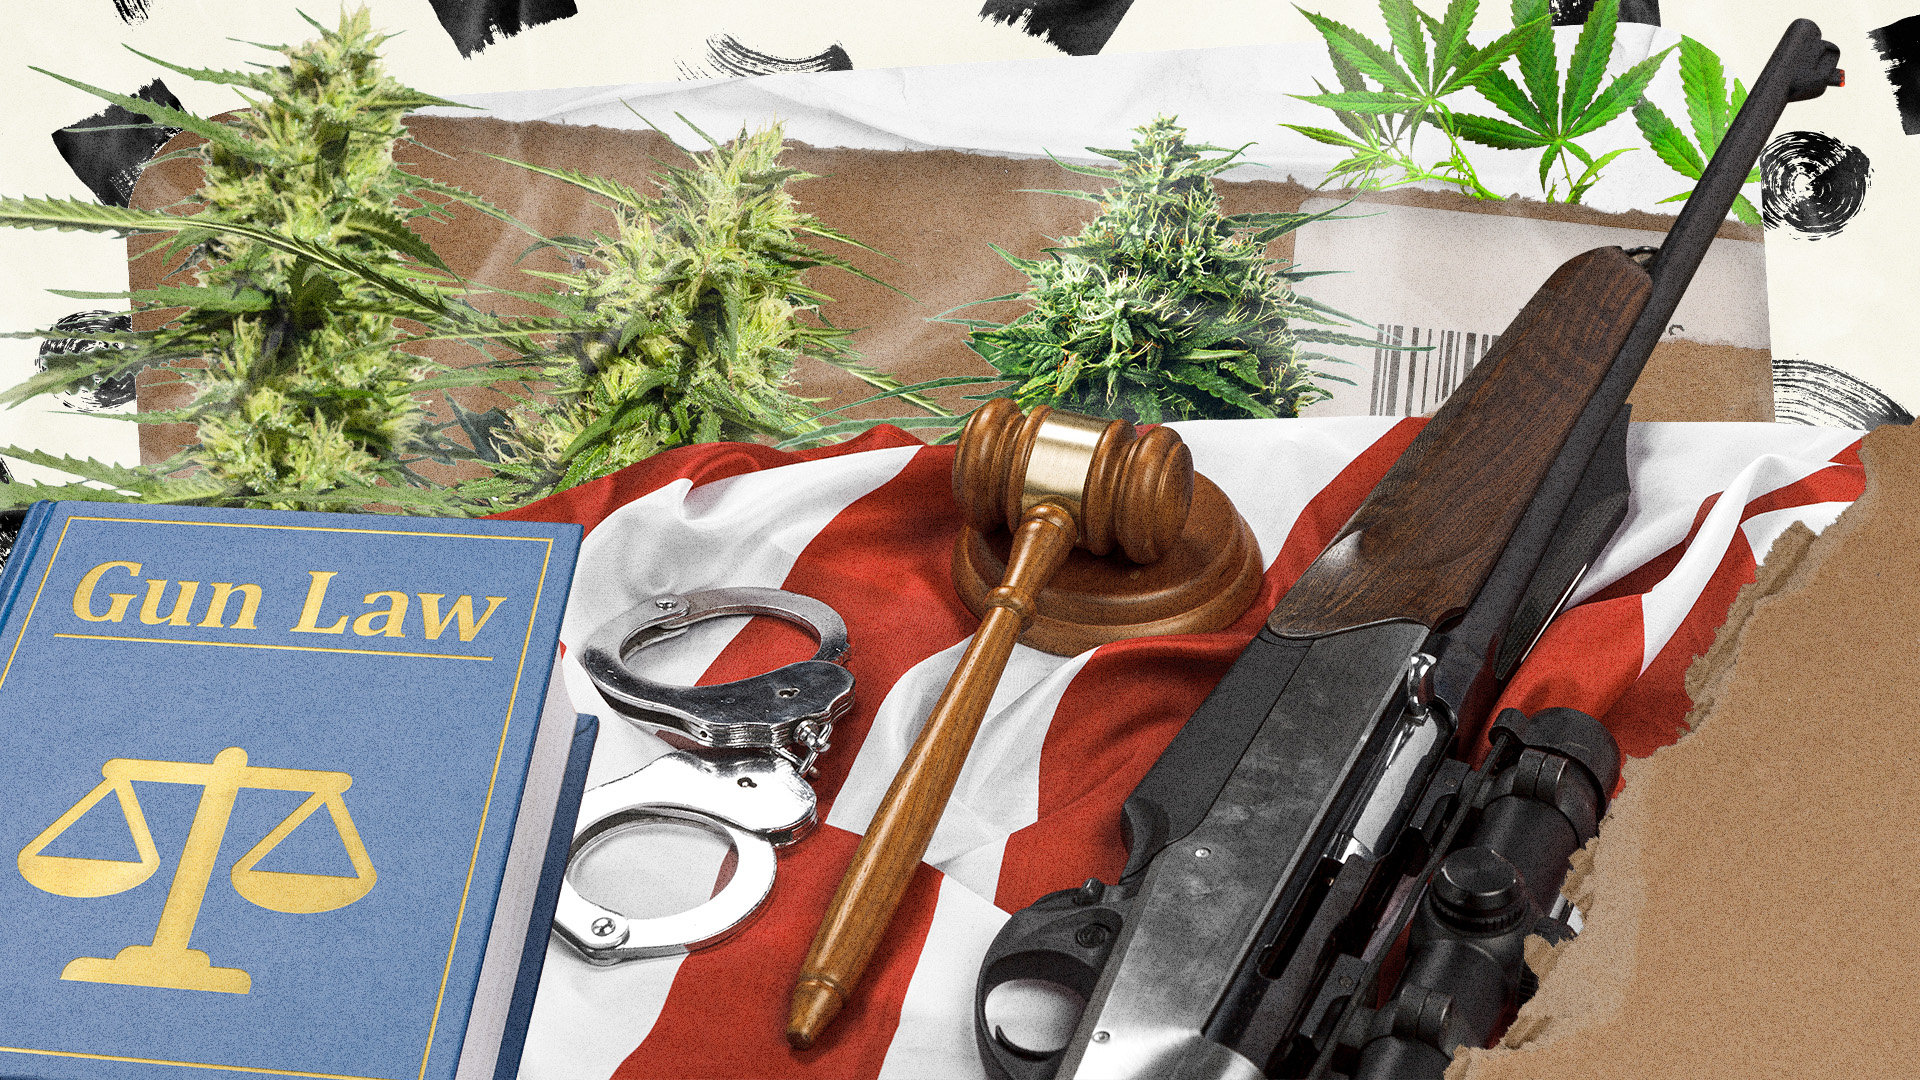 SD's "Advisory Law" and the MMJ Patient-Gun Ownership Debate